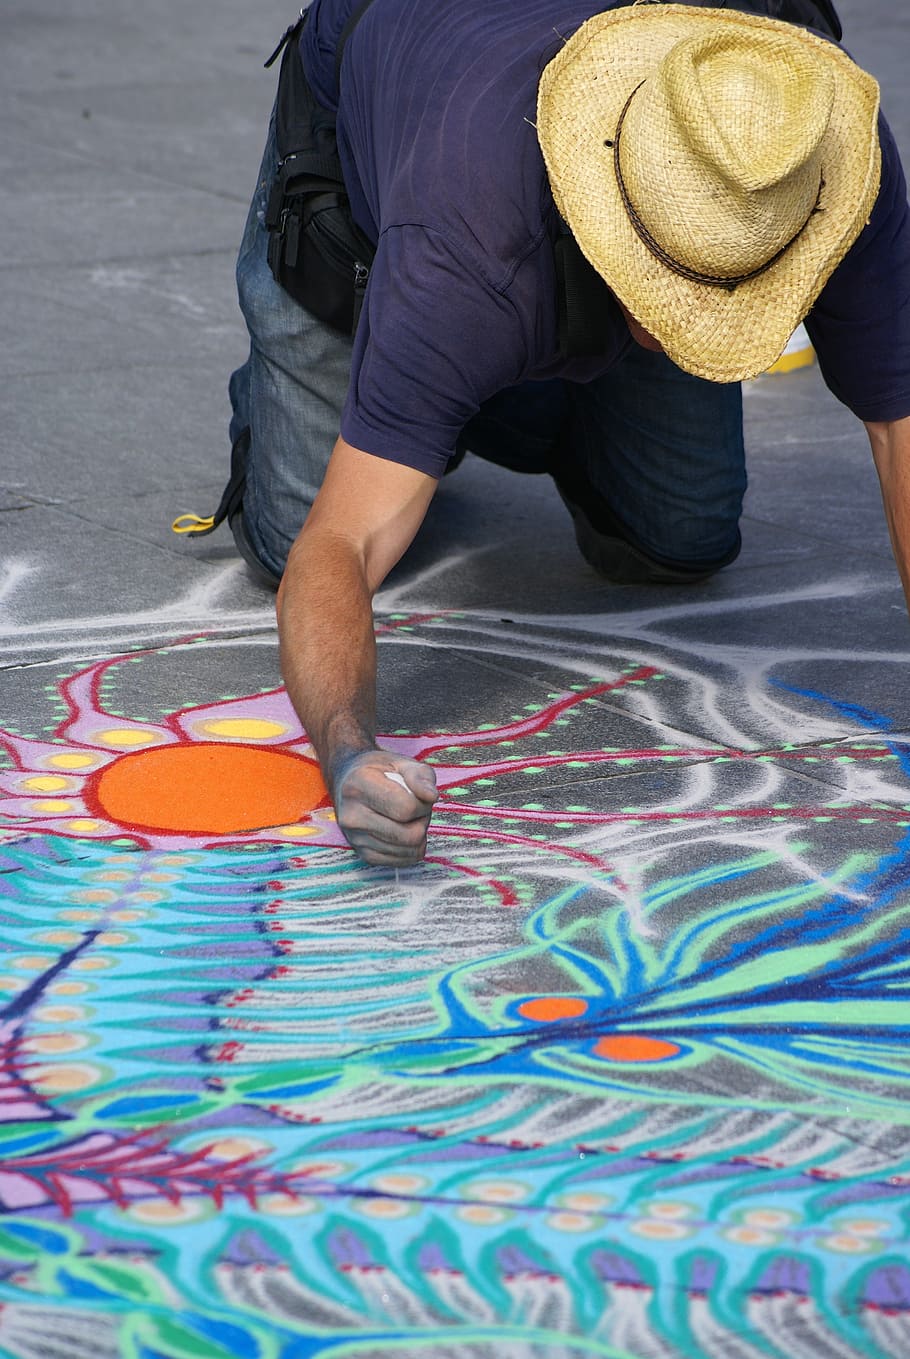 artist, chalk, drawing, artistic, color, creative, craft, colorful, draw, hat